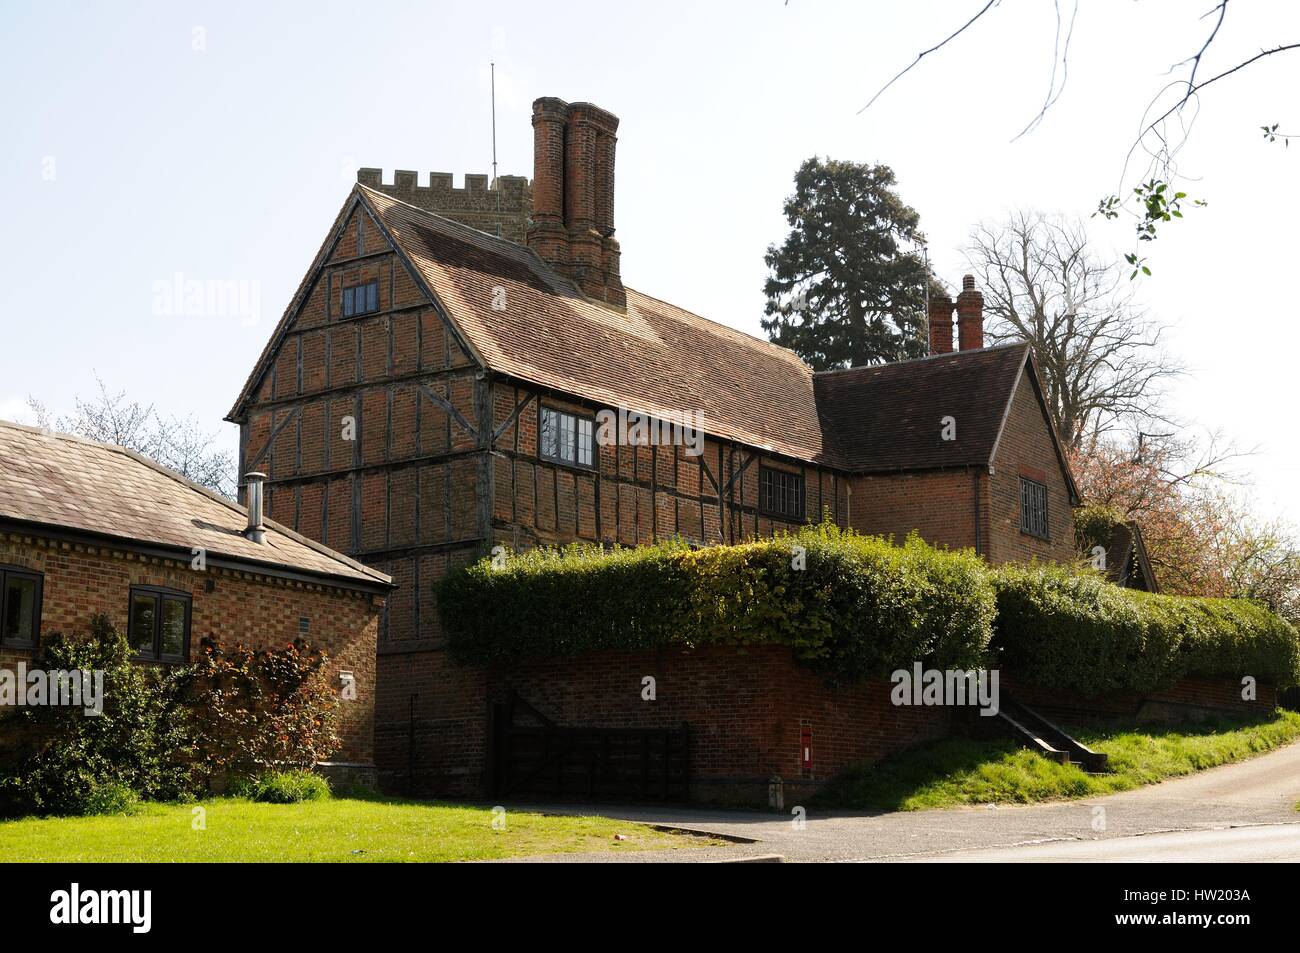 Manor Farm House, Husborne Crawley, Bedfordshire, stands in front of the church is a half-timbered building with brick infilling, and a tall chimney.  Stock Photo